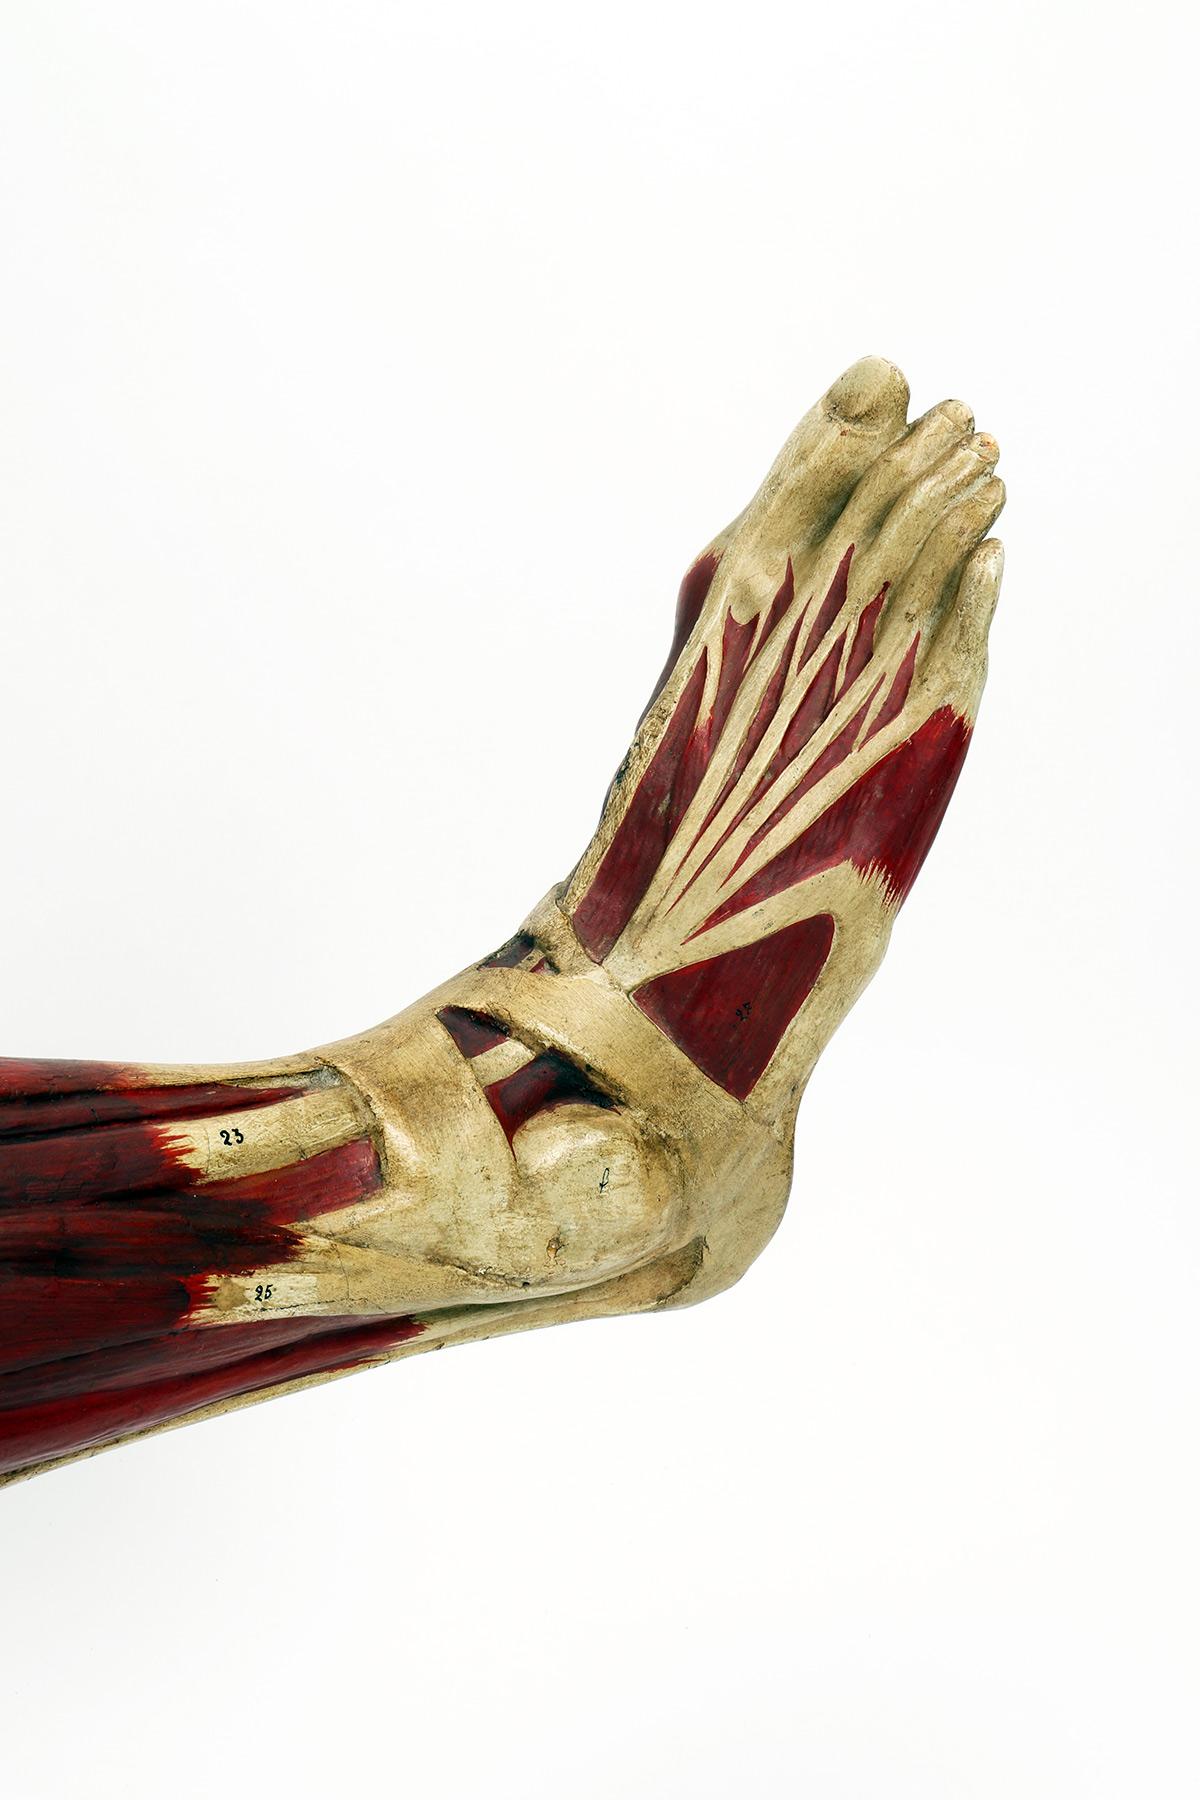 Anatomical model for schools, didactic use, depicting the lower limb, tilting on a fork supported by a black lacquered wooden base.
Made in scagliola and finished entirely in colour. For didactic use, the limb is hinged to tilt, supported by a